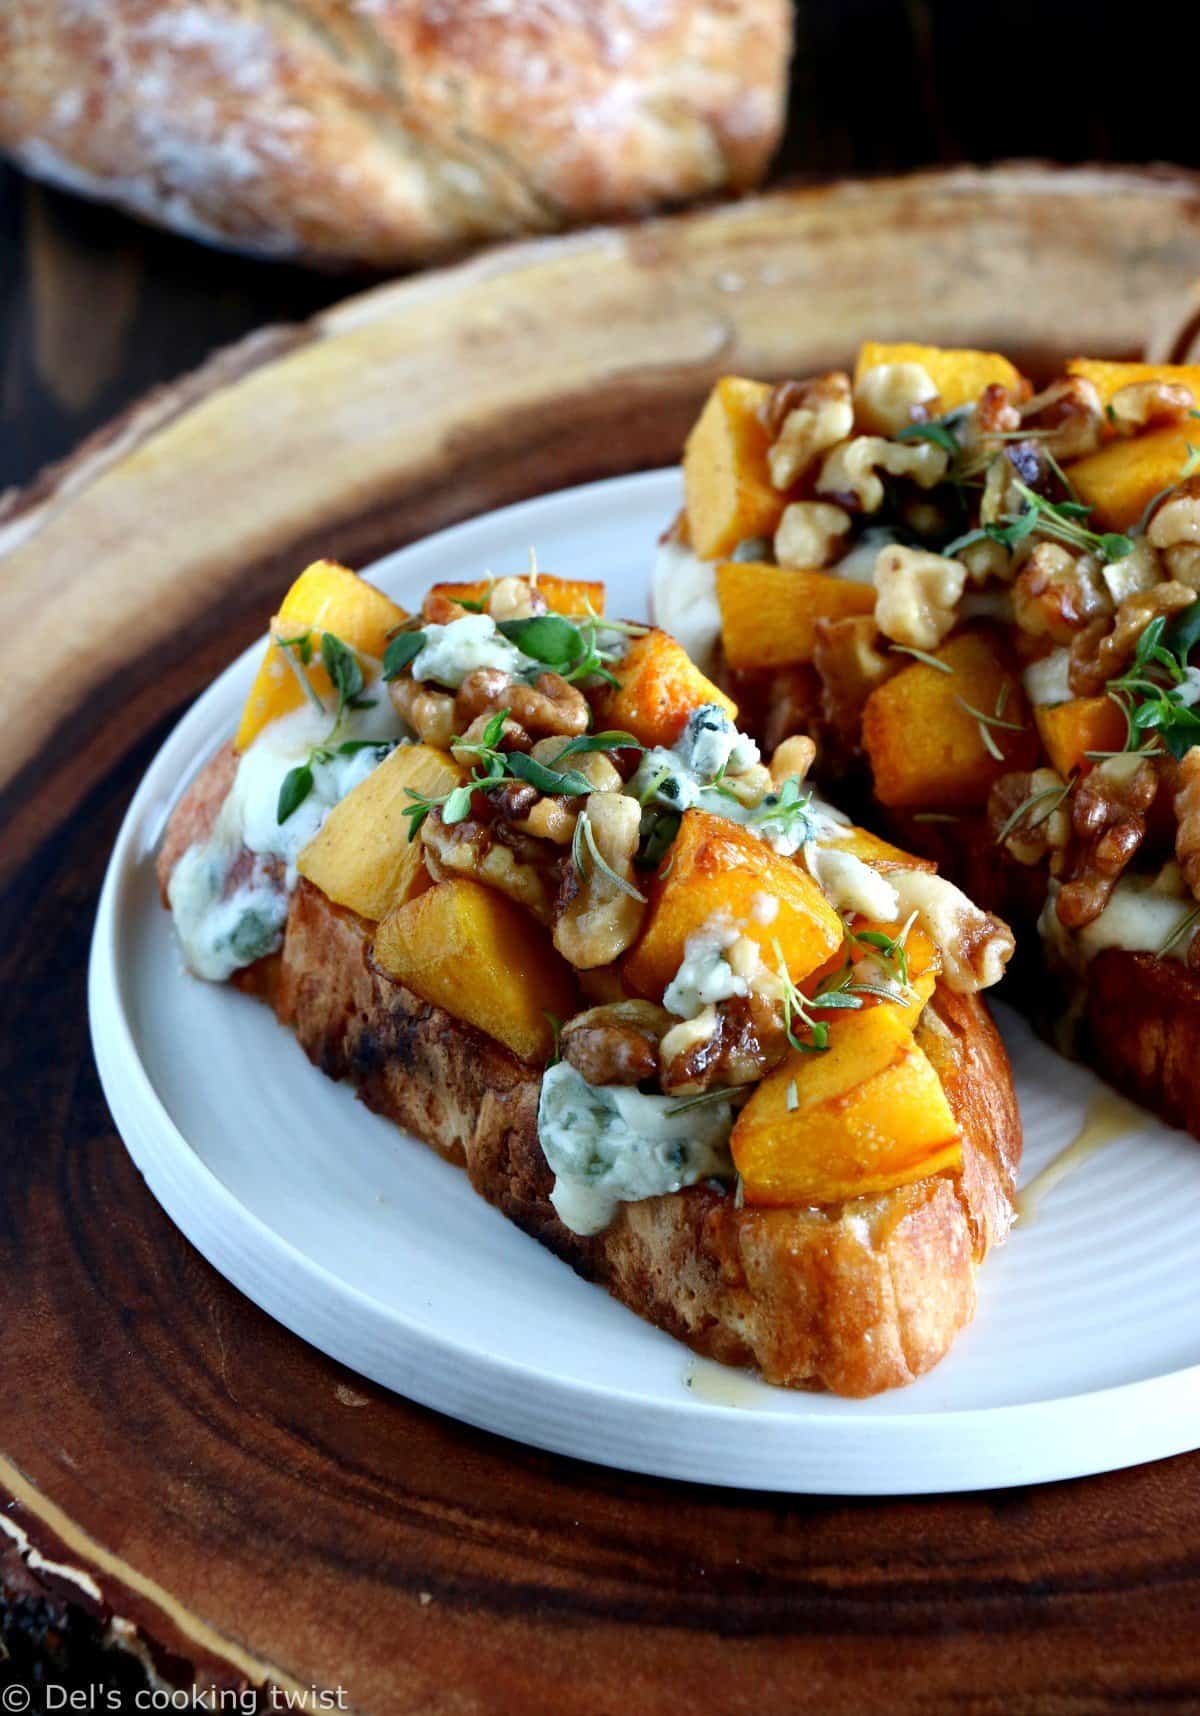 Pumpkin and Walnut Tartines with Blue Cheese